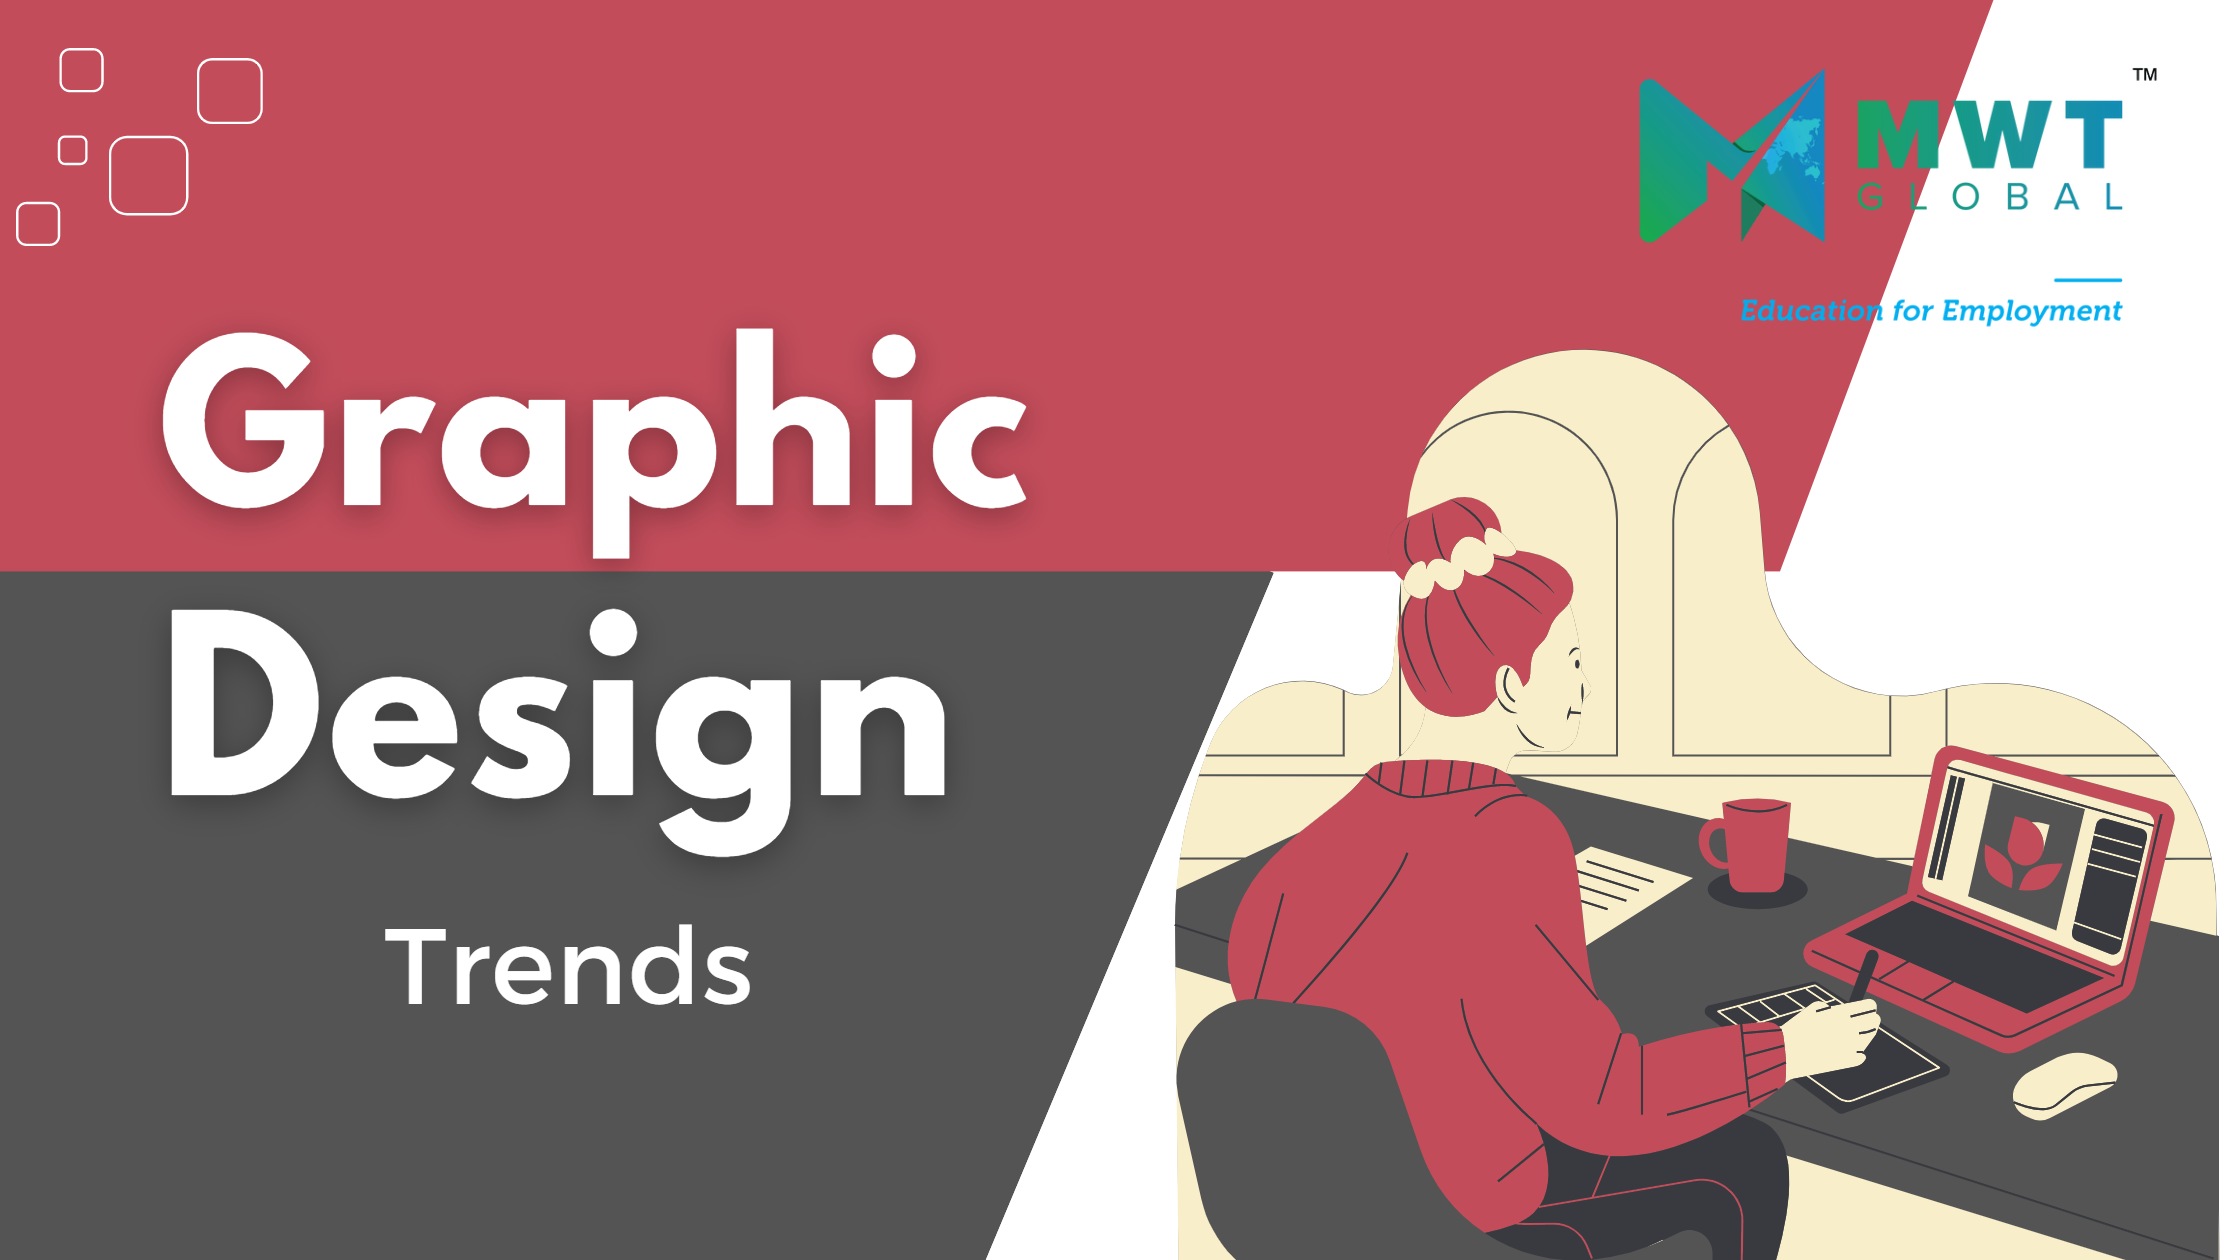 What are the top unique graphic design trends that will define 2023